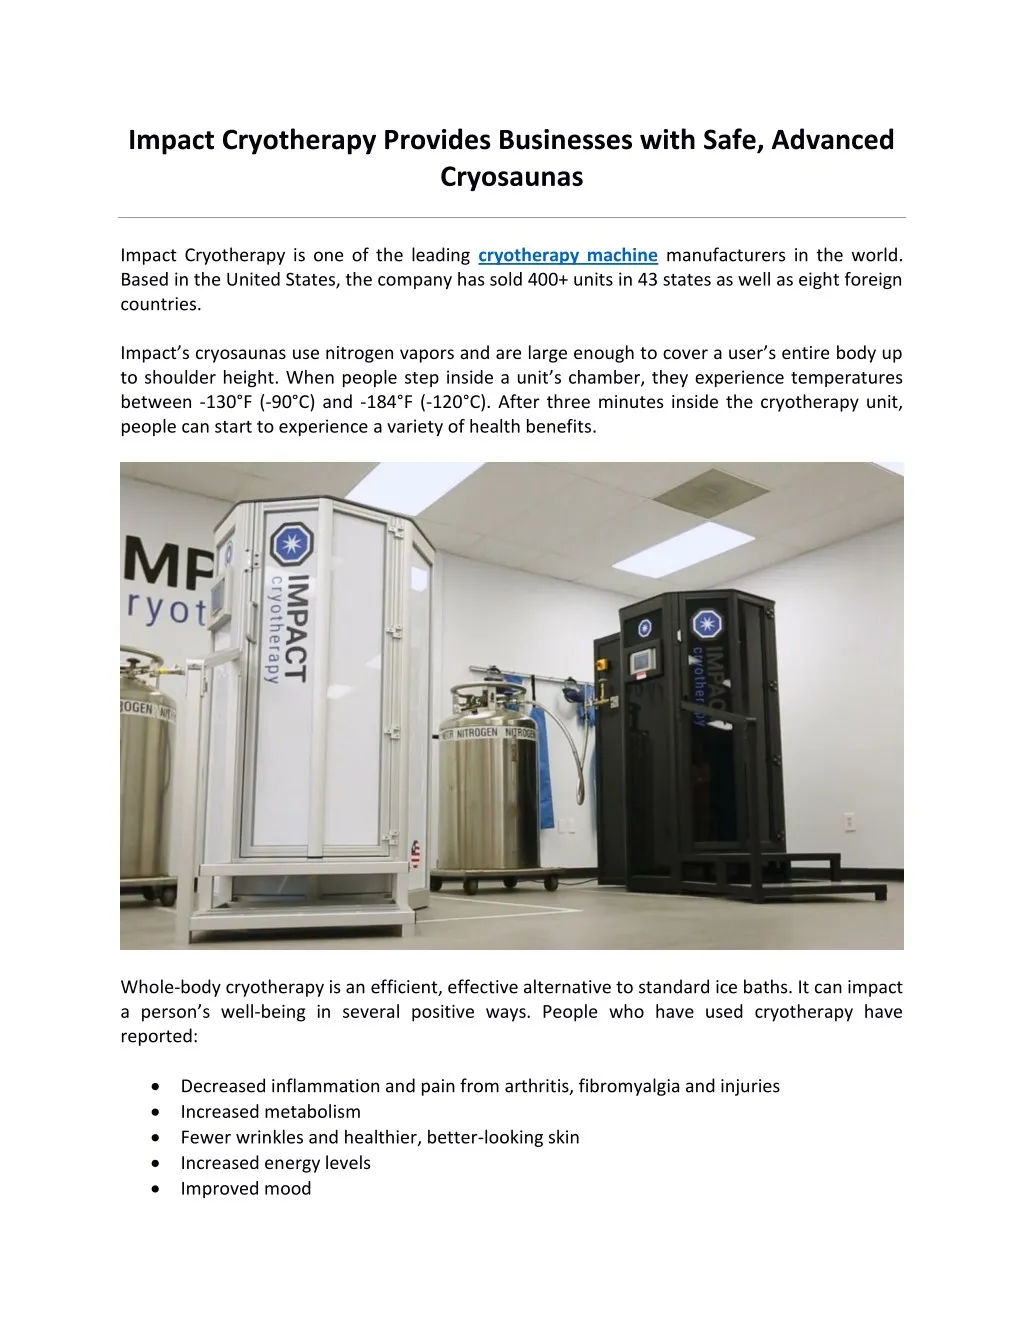 impact cryotherapy provides businesses with safe